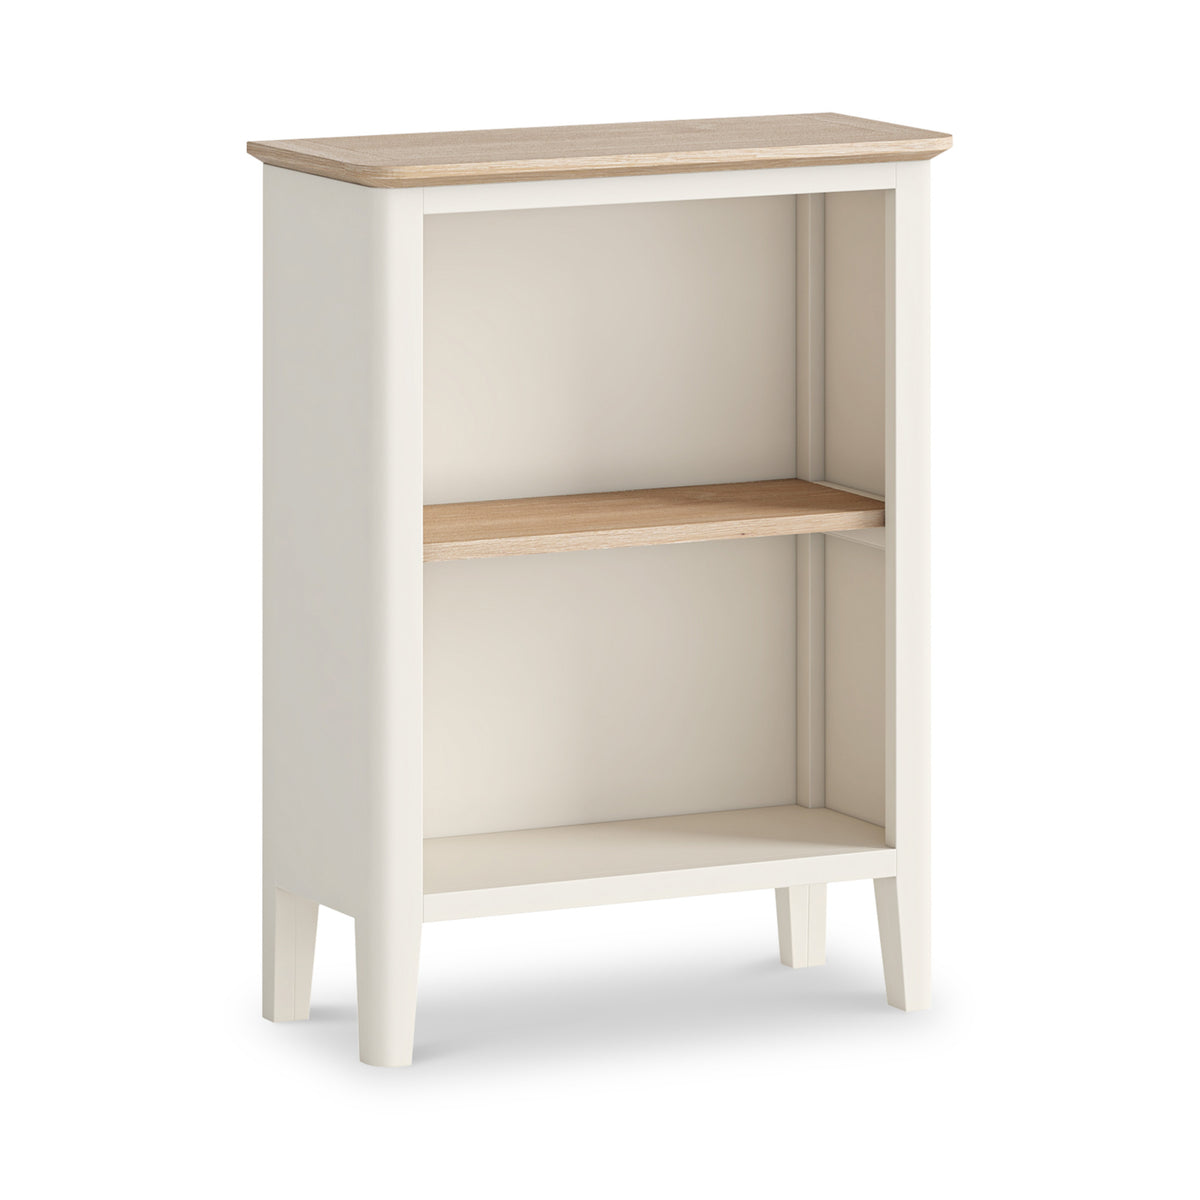 Penrose Coconut white Small Bookcase from Roseland Furniture